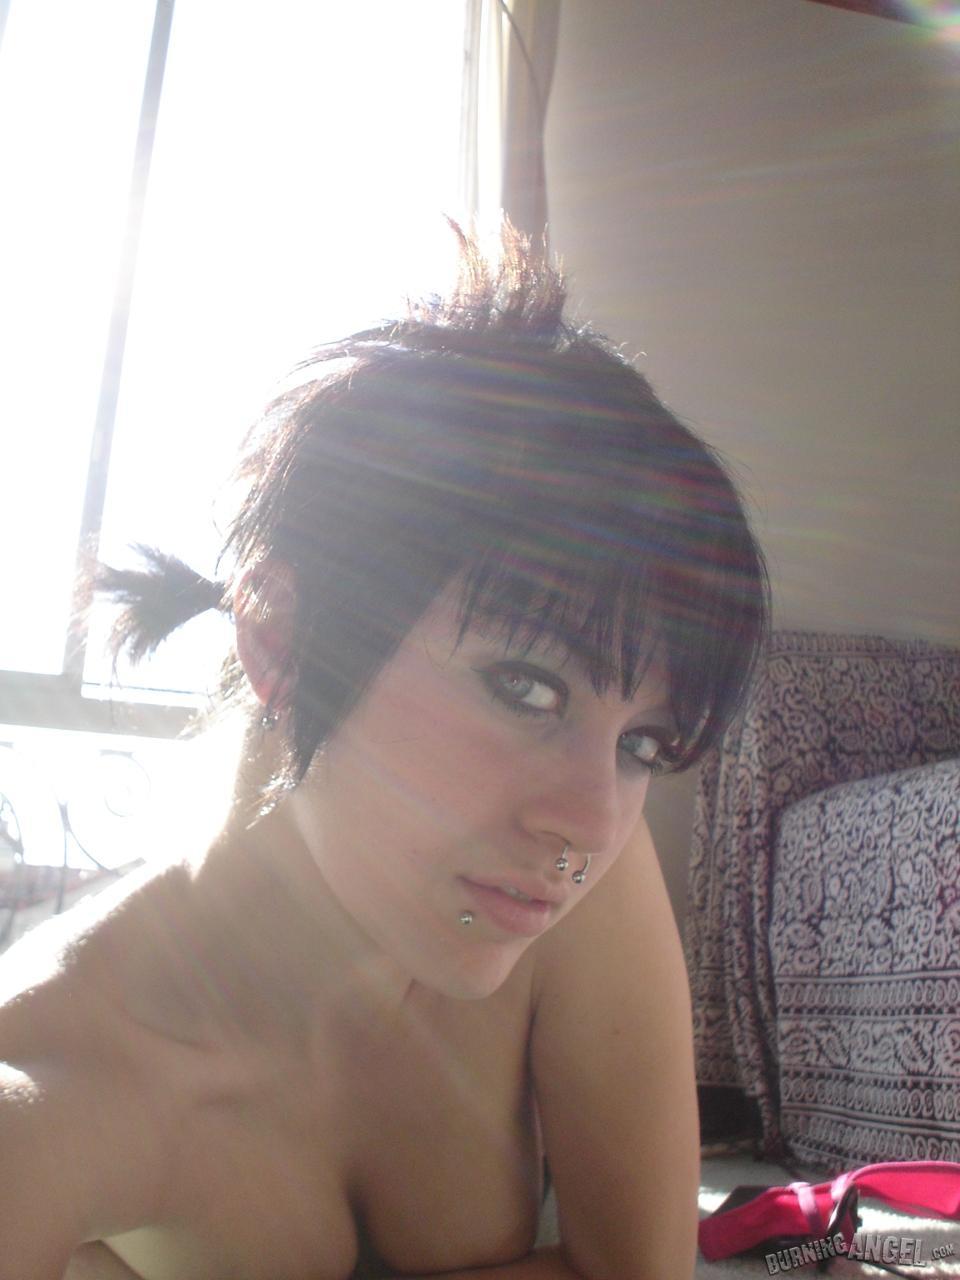 Short-haired punk chick with pierced nose, lip, navel in her own photos(9)